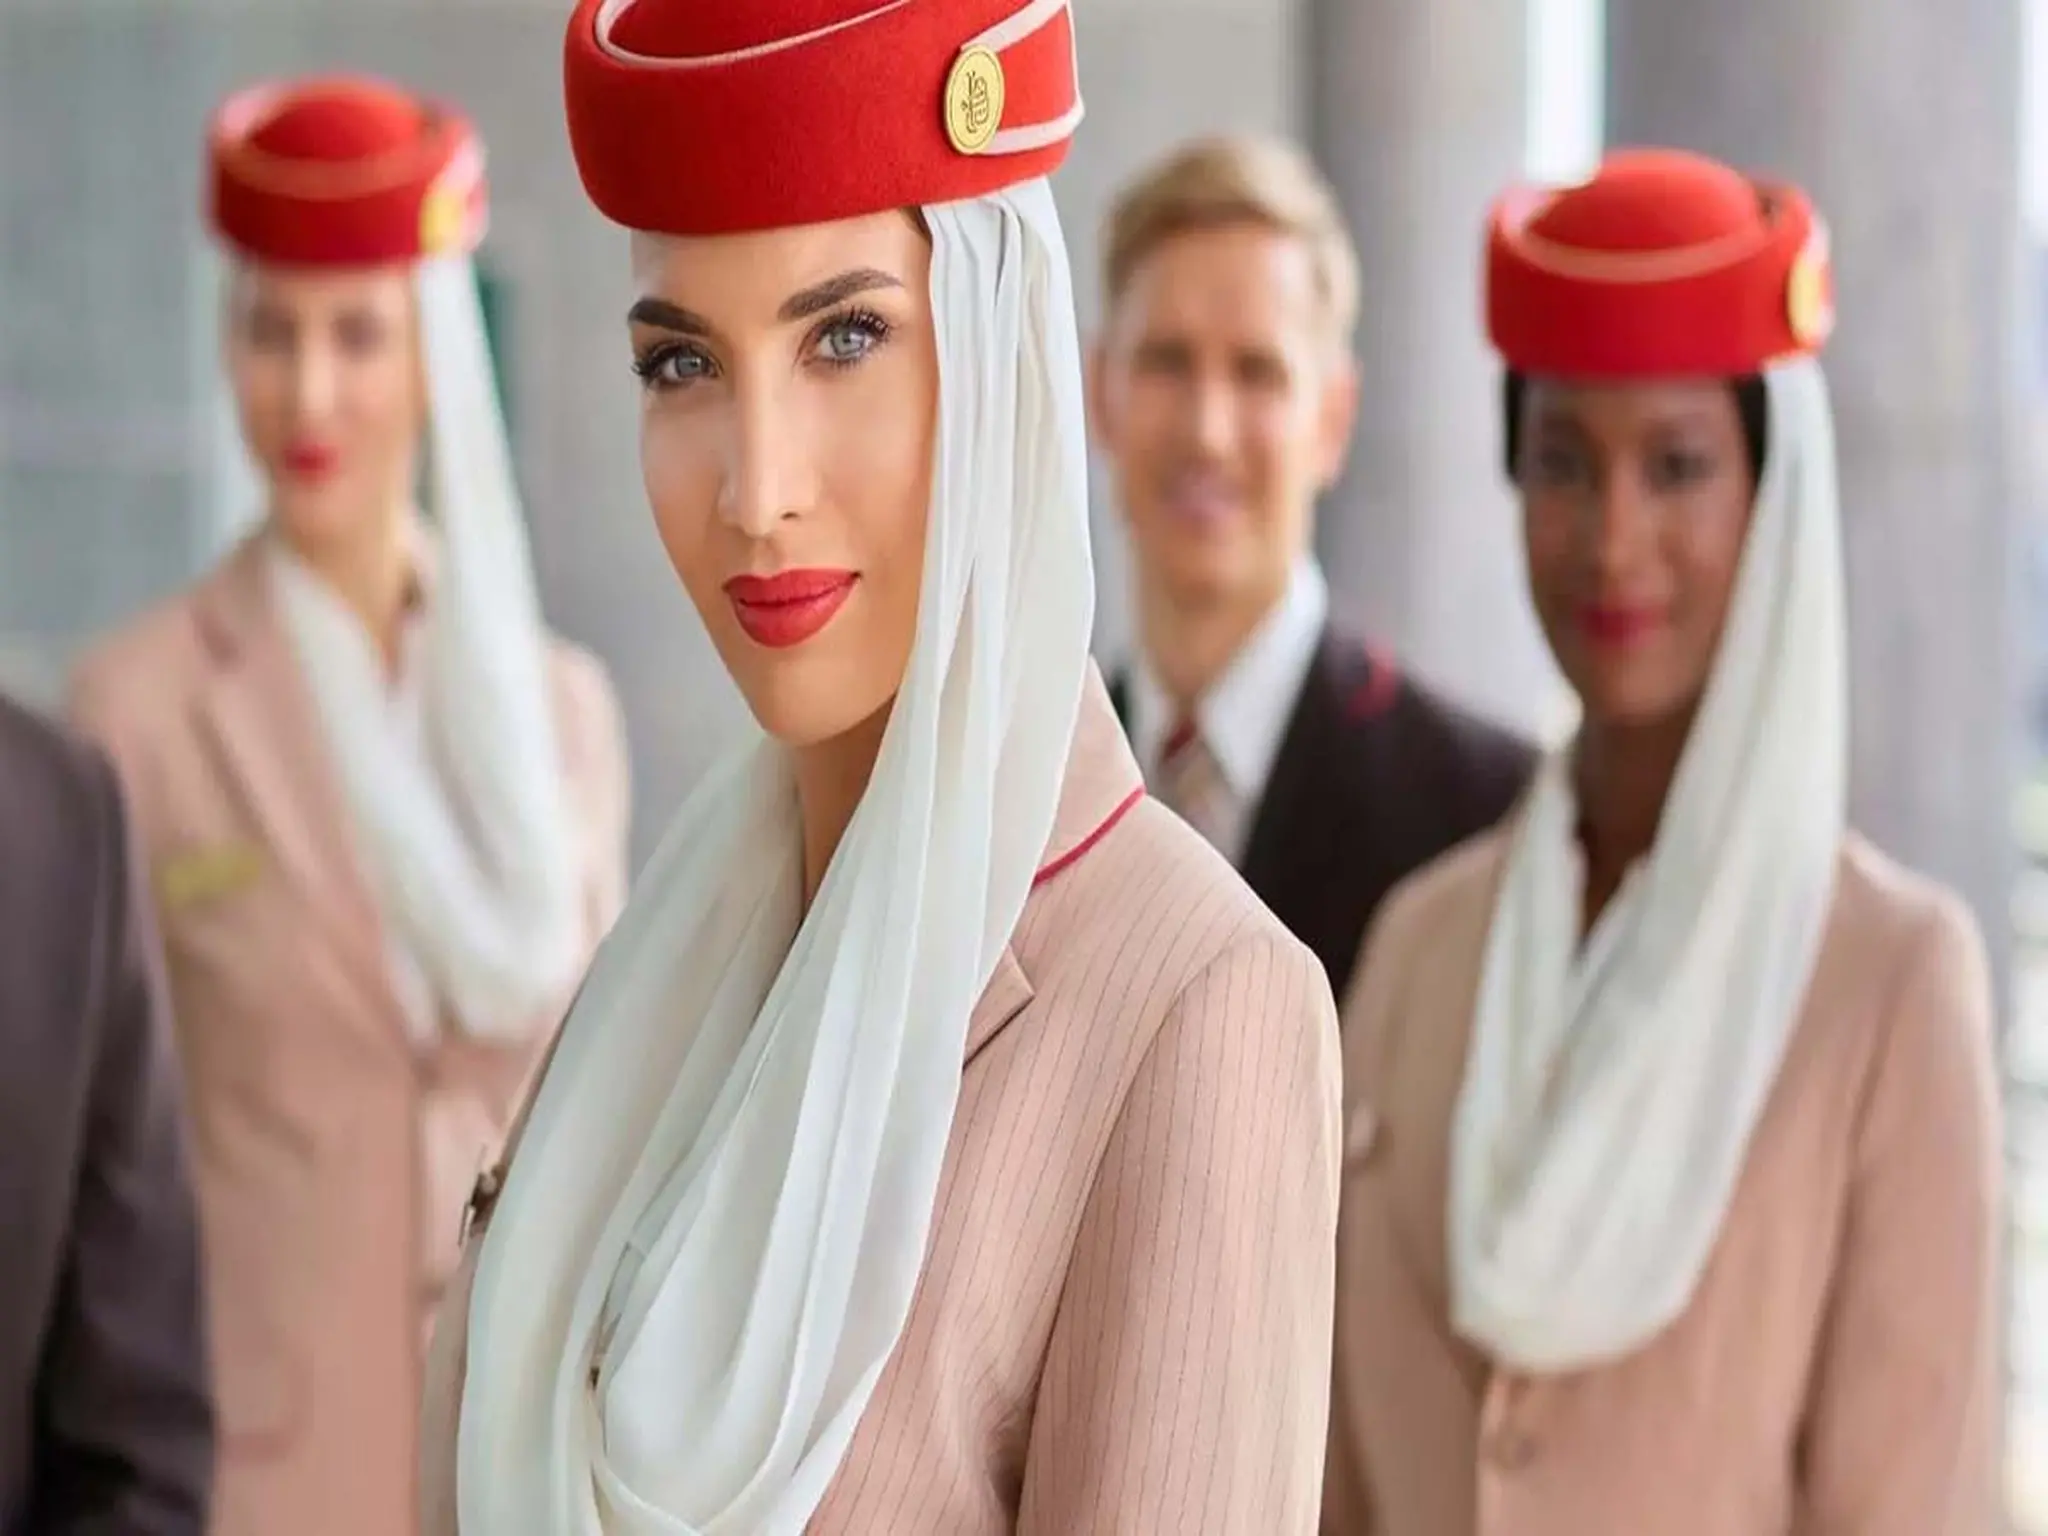 The Emirates announces 5,000 new jobs in the aviation sector.. under these conditions